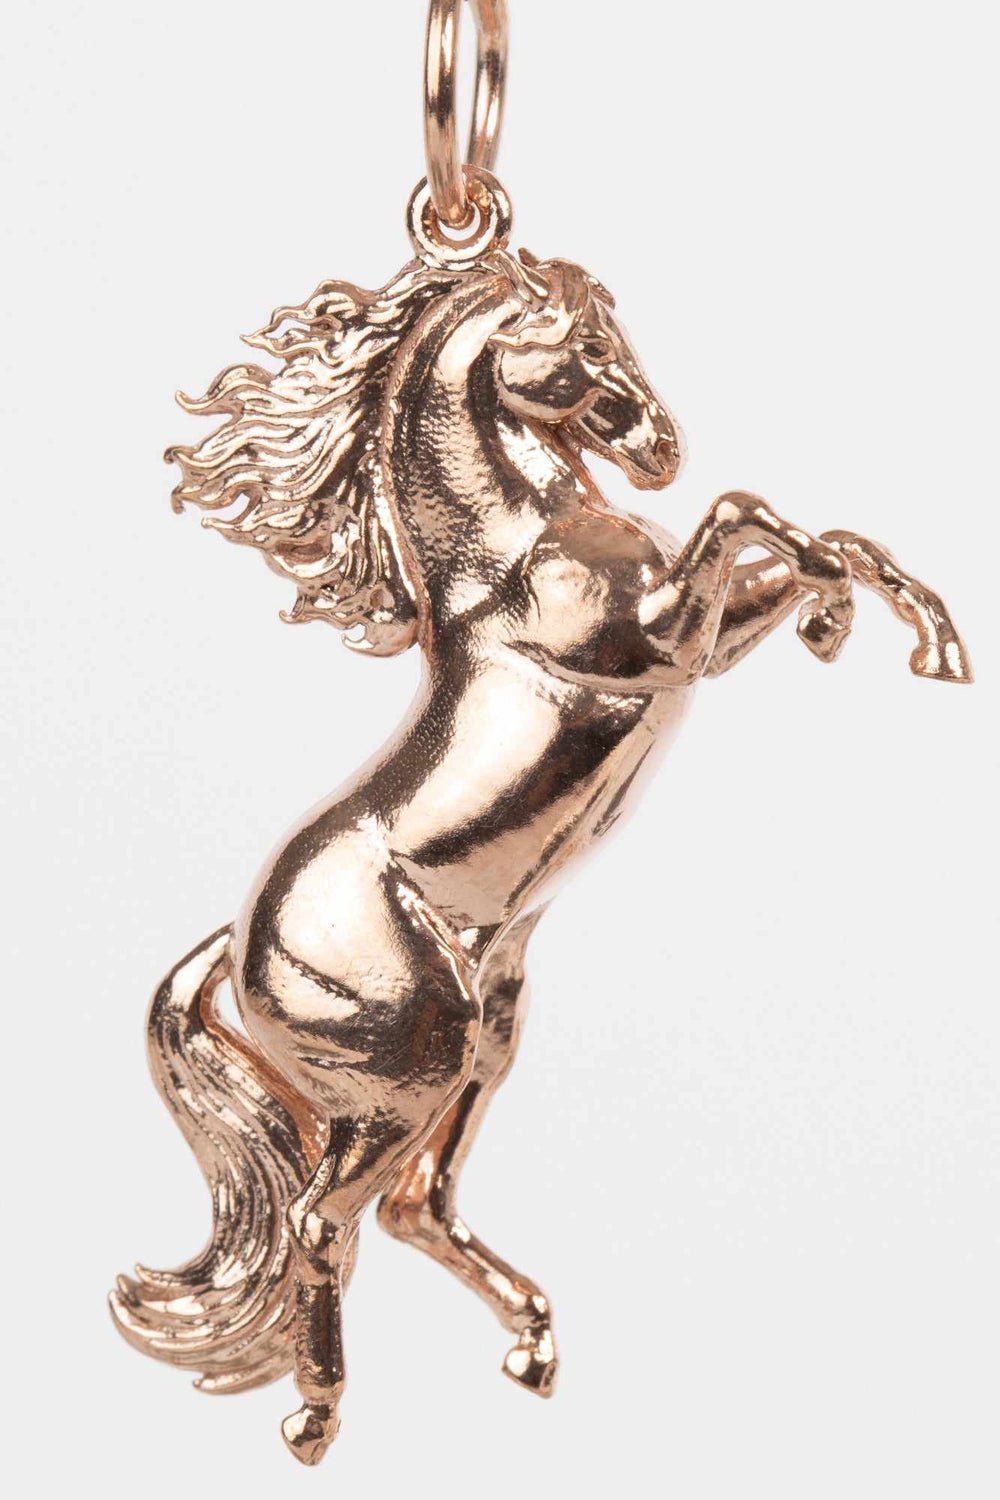 The Rearing Wild Horse Pendant- Gold Horse necklace - The Wild Horse Club